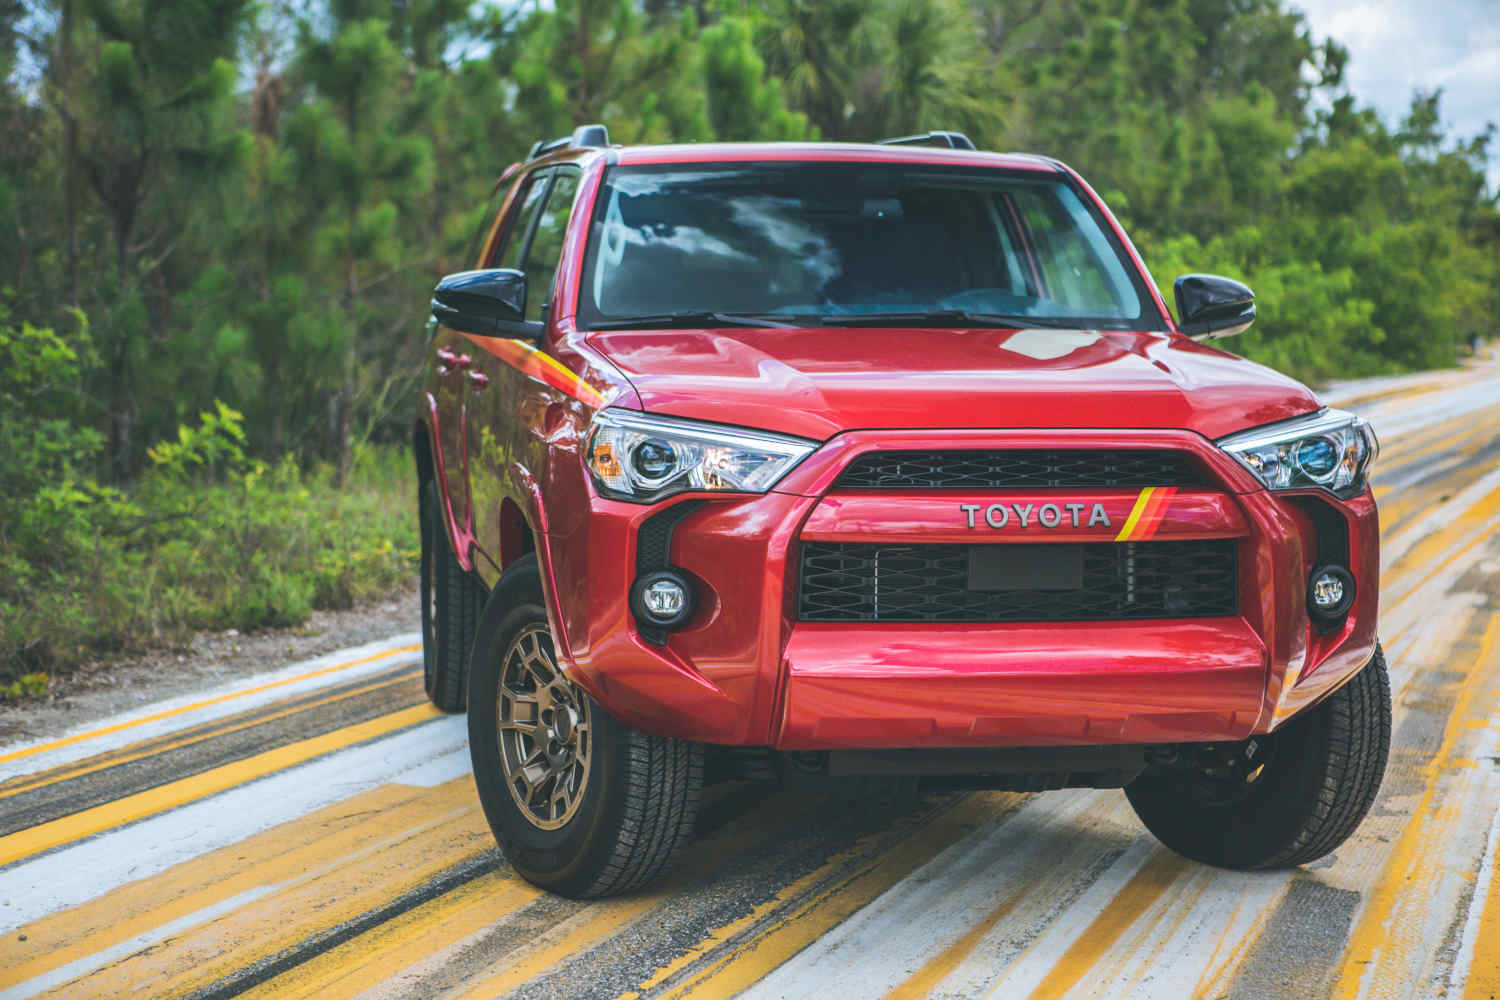 The most common Toyota 4Runner problems